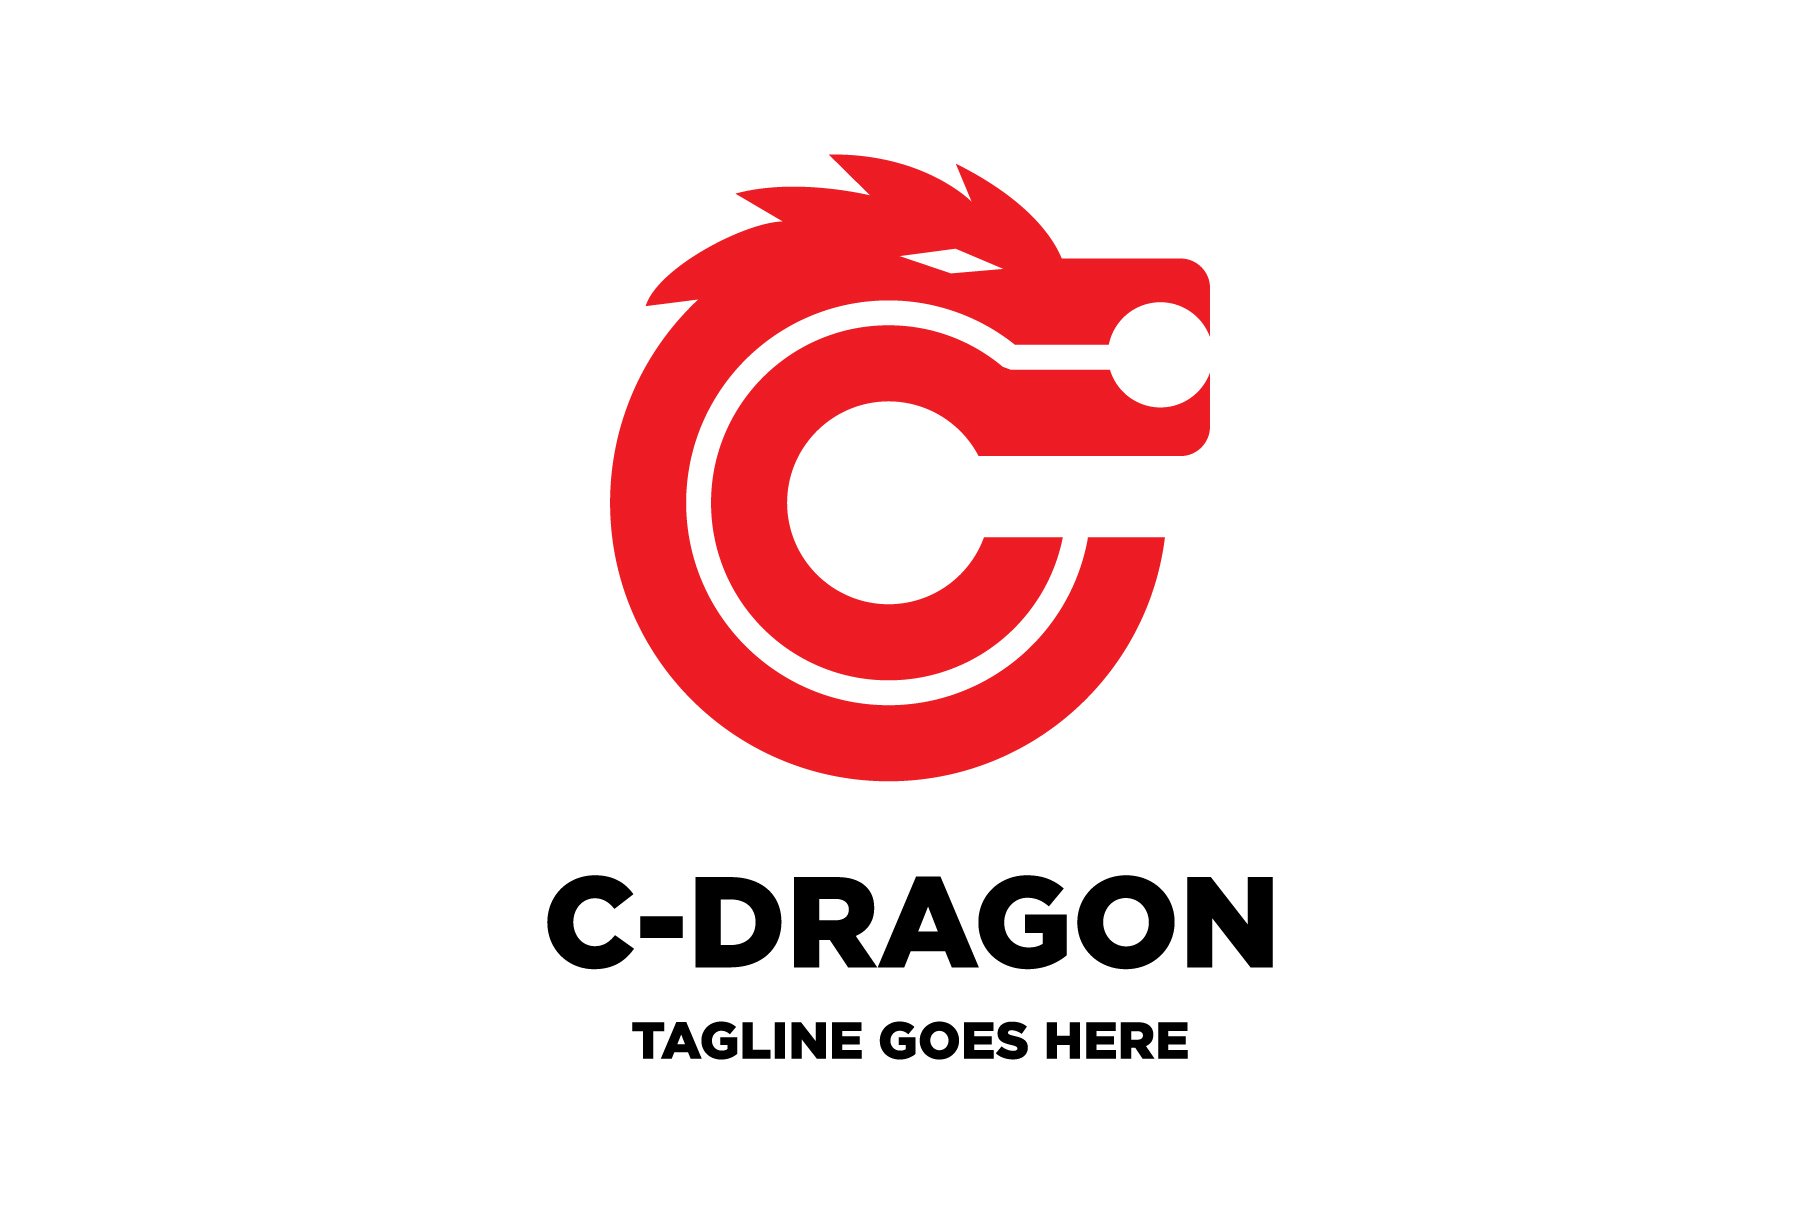 C and Dragon logo cover image.